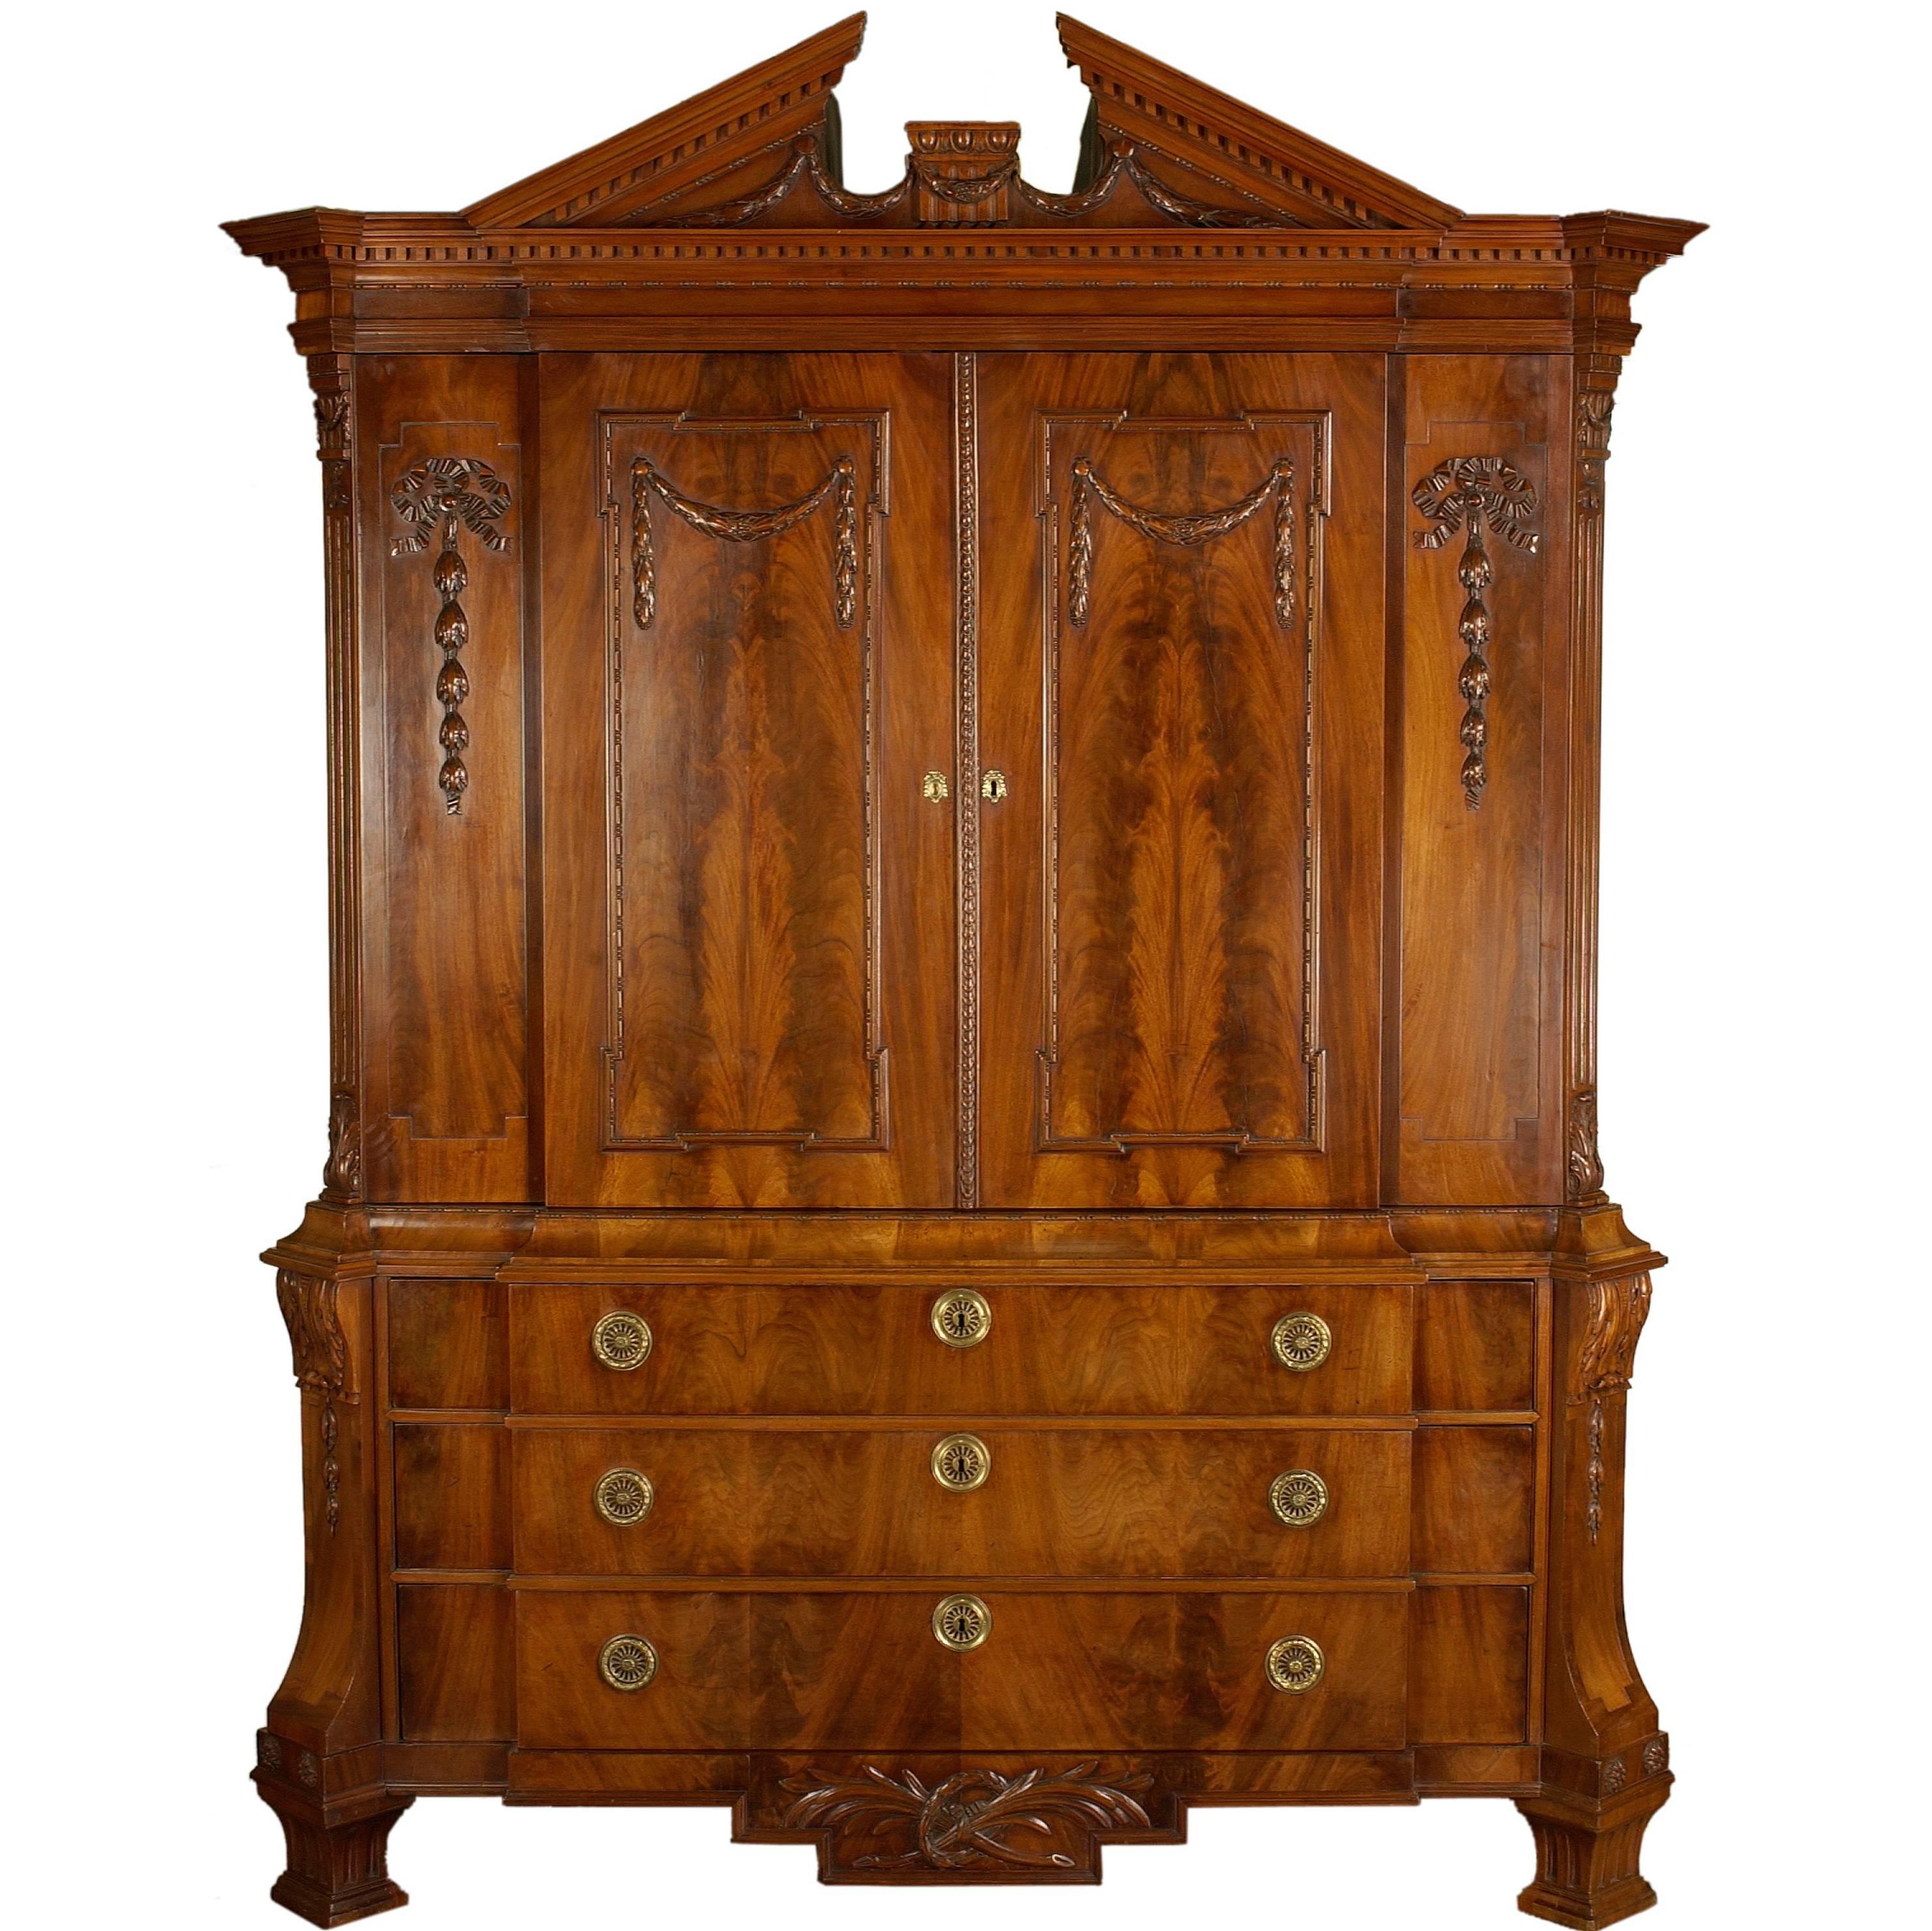 Late 18th Century Neoclassical Break-Front Cabinet with Timpan For Sale